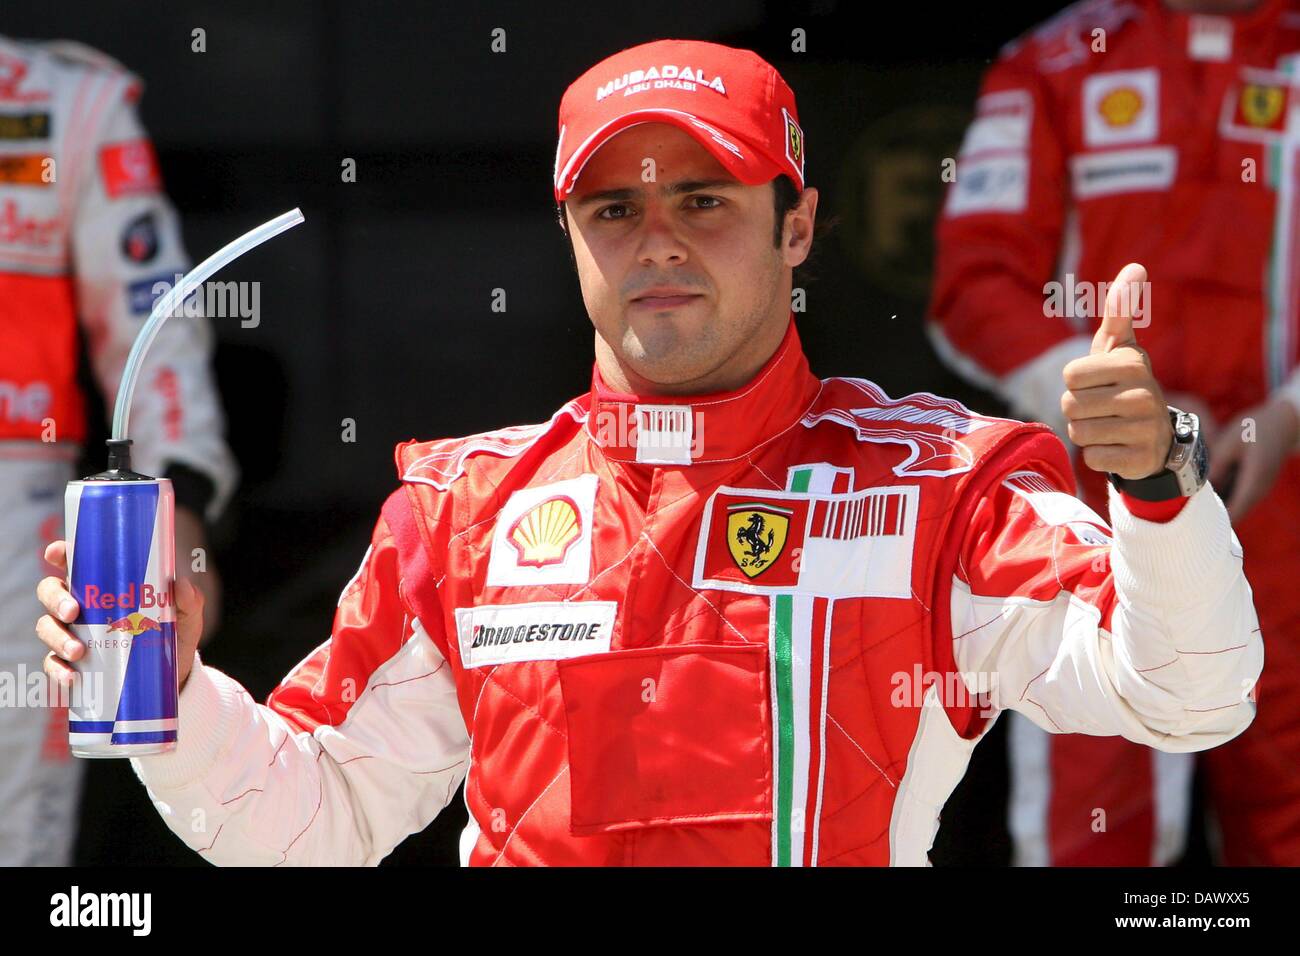 Brazilian Formula One pilot Felipe Massa of Ferrari makes a gesture after the third practice session at the Circuit de Catalunya race track near Barcelona, Spain, 12 May 2007. Massa clocked the fastest lap. The 2007 Formula 1 Grand Prix of Spain takes place on 13 May. Photo: Jens Buettner Stock Photo